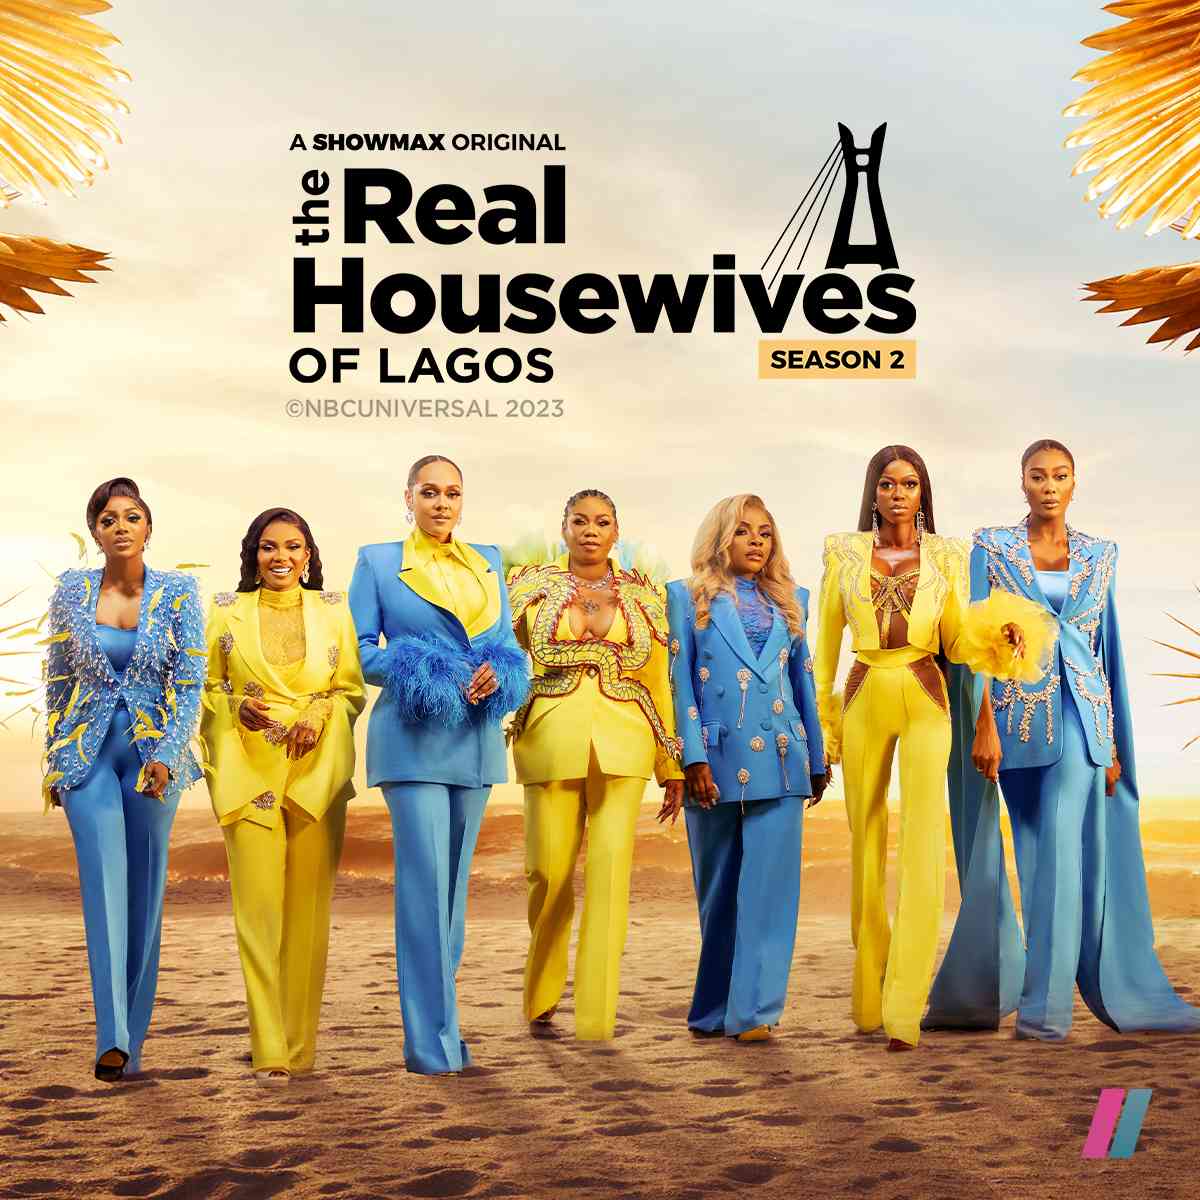 DOWNLOAD The Real Housewives of Lagos Season 2 (Episode 13 Added) - Nollywood Series